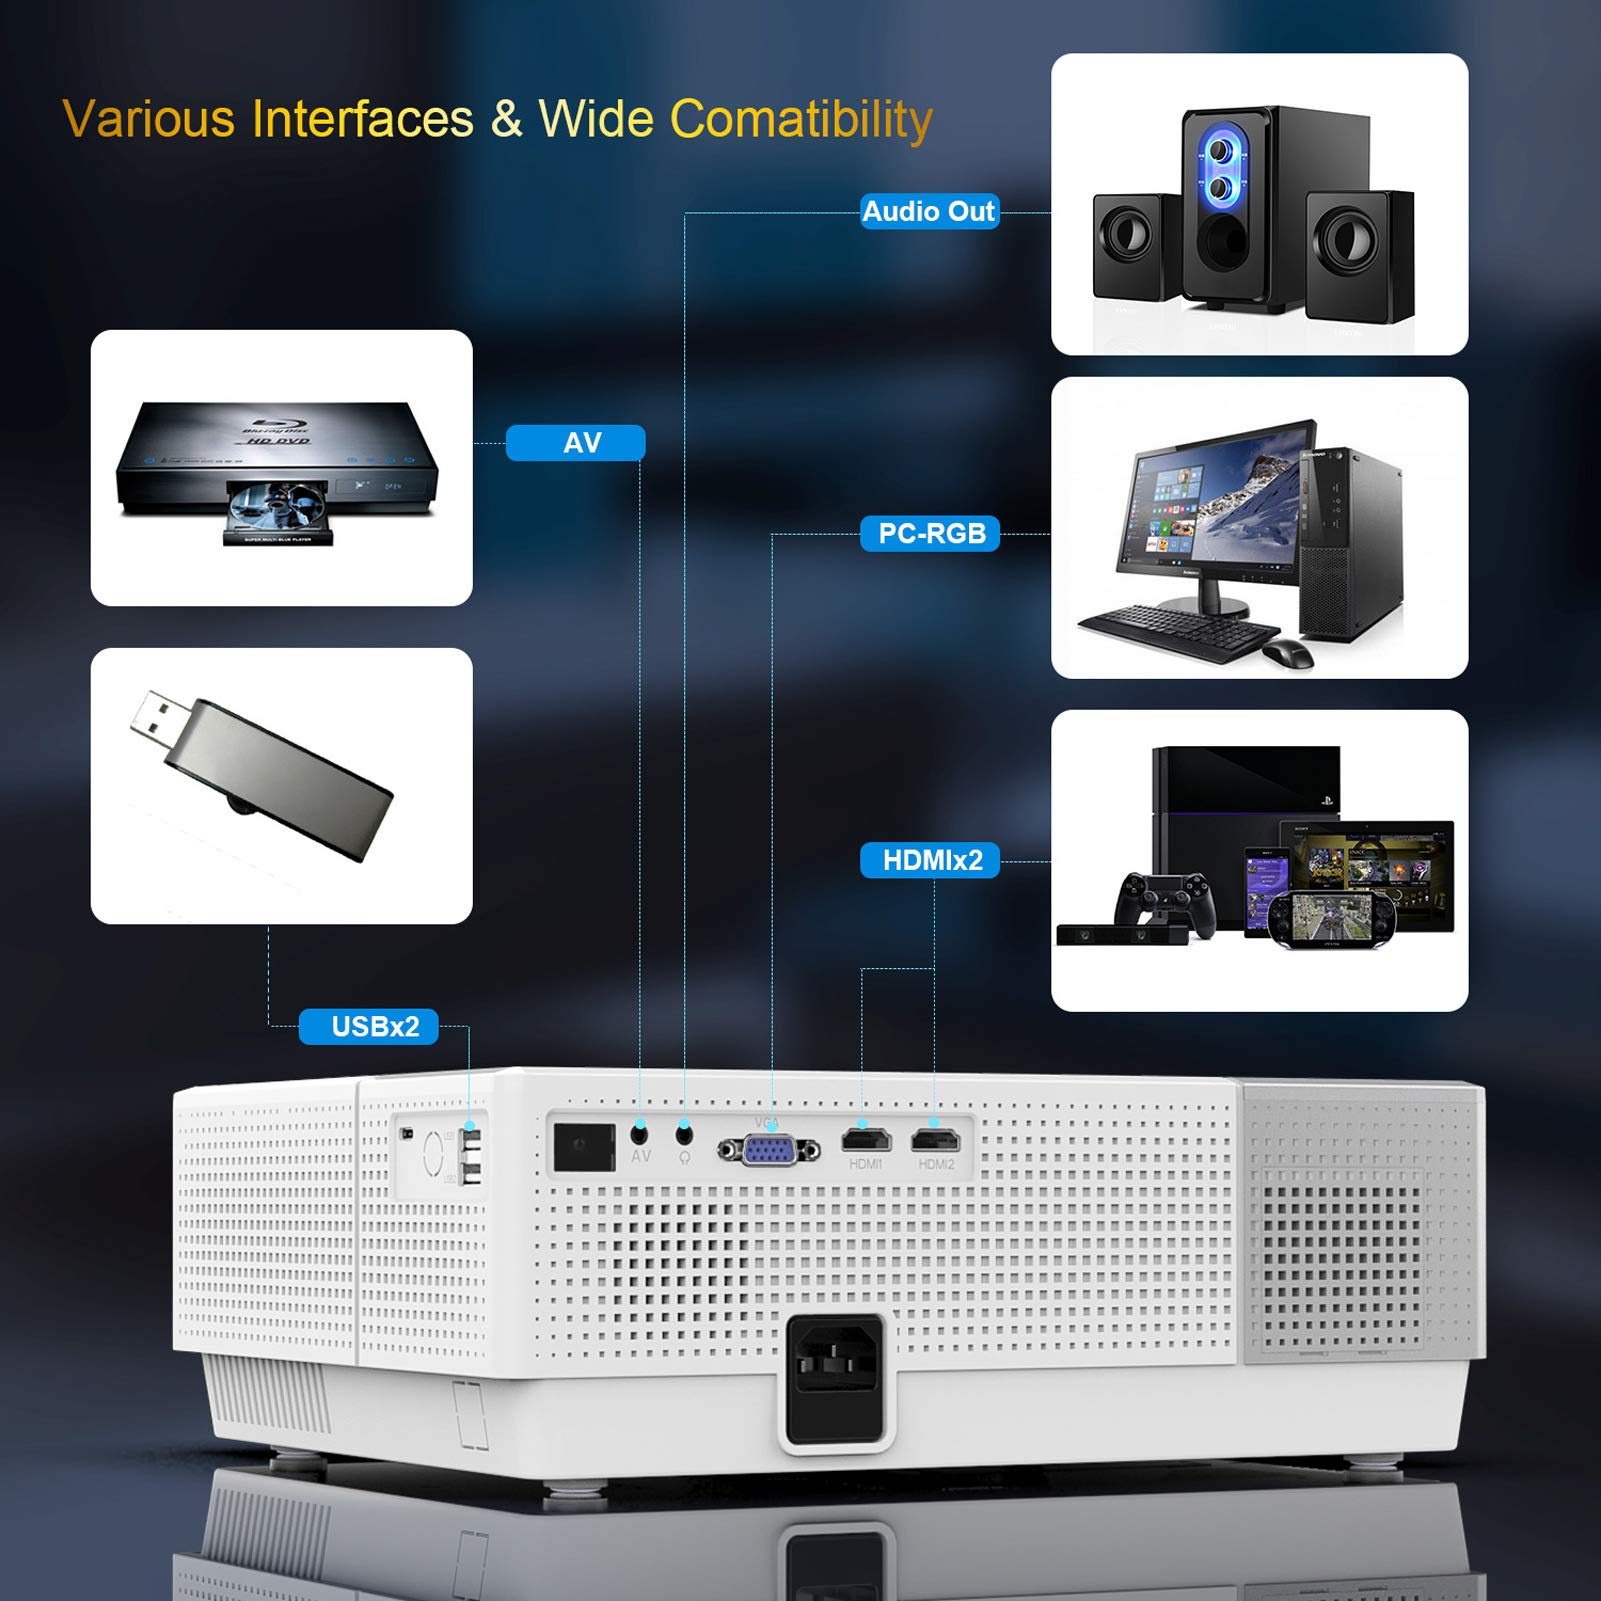 YABER Y31 Native 1920x 1080P Projector 7200 Lux Upgrade Full HD Video Projector, ±50° 4D Keystone Correction Support 4K, LCD LED Home Theater Projector Compatible with Phone,PC,TV Box,PS4